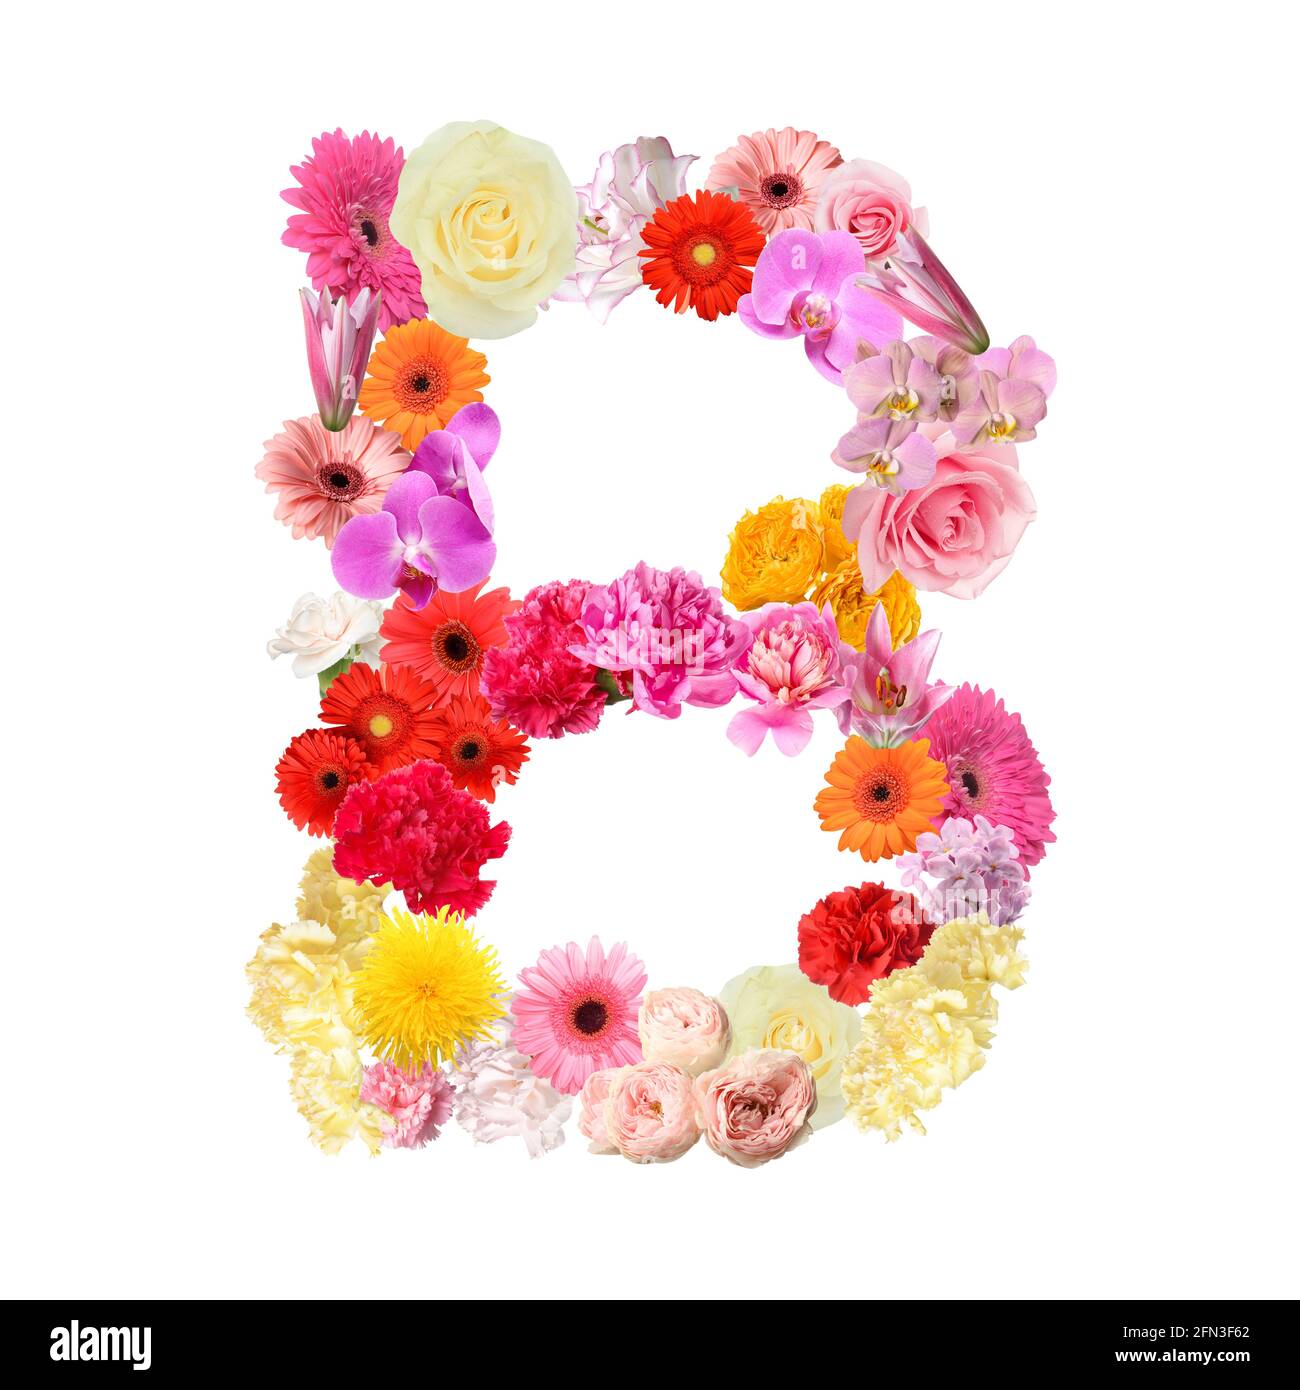 Letter B made of beautiful flowers on white background Stock Photo ...